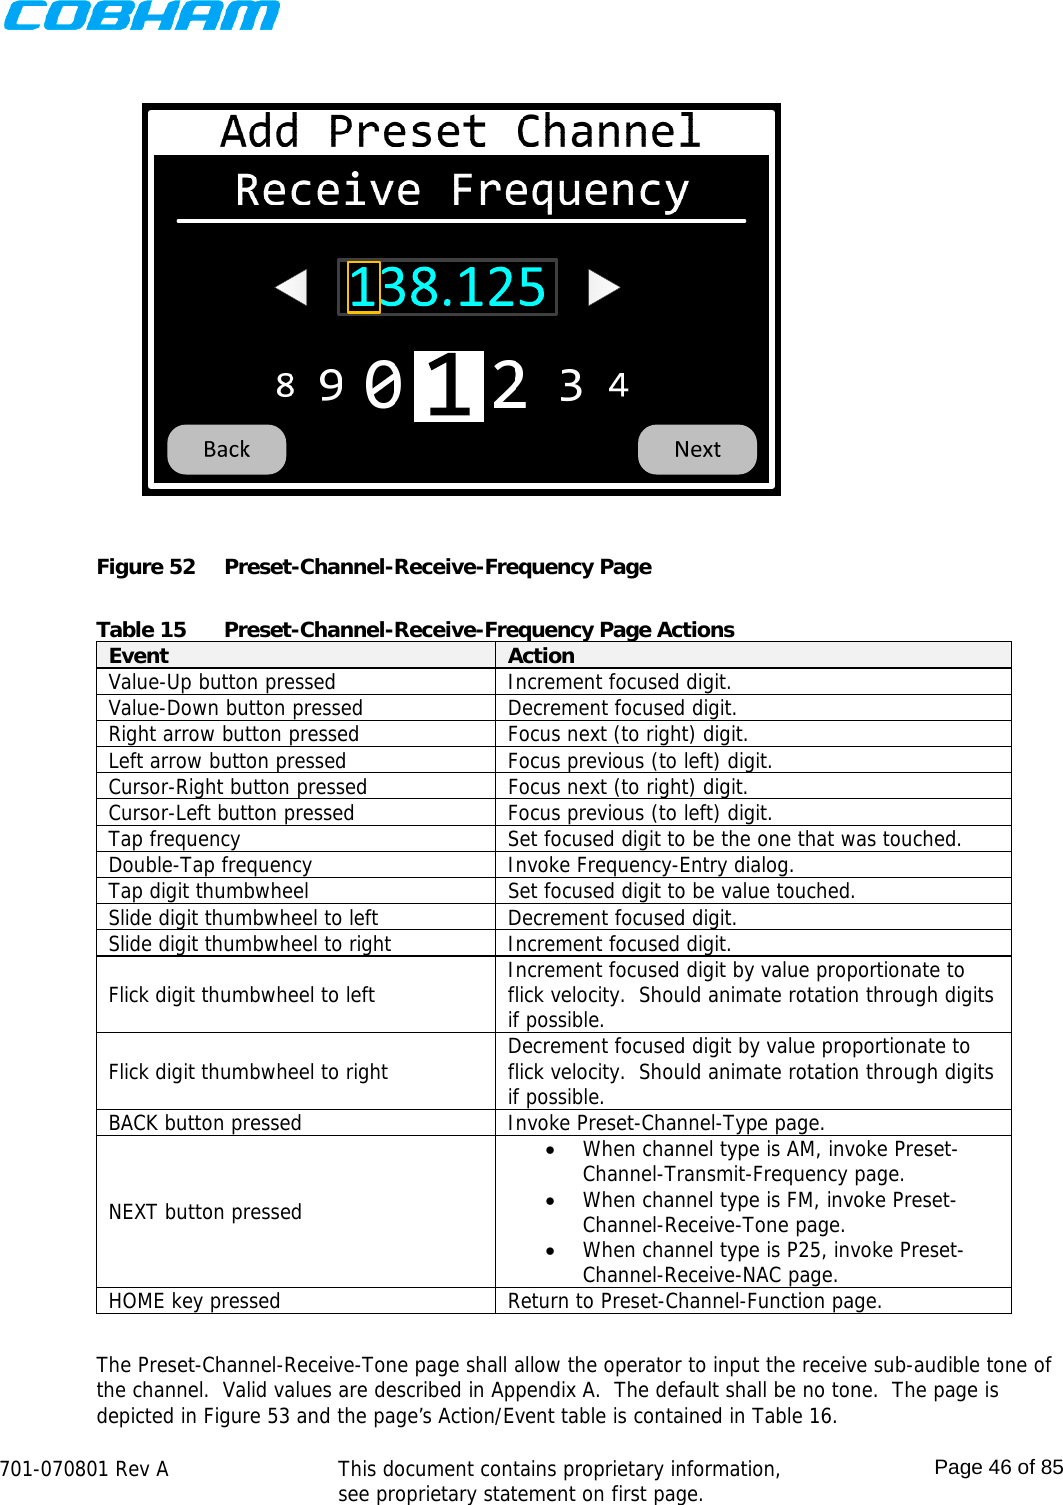    701-070801 Rev A   This document contains proprietary information, see proprietary statement on first page.  Page 46 of 85   Figure 52  Preset-Channel-Receive-Frequency Page  Table 15  Preset-Channel-Receive-Frequency Page Actions Event  Action Value-Up button pressed  Increment focused digit. Value-Down button pressed  Decrement focused digit. Right arrow button pressed  Focus next (to right) digit. Left arrow button pressed  Focus previous (to left) digit. Cursor-Right button pressed  Focus next (to right) digit. Cursor-Left button pressed  Focus previous (to left) digit. Tap frequency  Set focused digit to be the one that was touched. Double-Tap frequency  Invoke Frequency-Entry dialog. Tap digit thumbwheel  Set focused digit to be value touched. Slide digit thumbwheel to left  Decrement focused digit. Slide digit thumbwheel to right  Increment focused digit. Flick digit thumbwheel to left  Increment focused digit by value proportionate to flick velocity.  Should animate rotation through digits if possible. Flick digit thumbwheel to right  Decrement focused digit by value proportionate to flick velocity.  Should animate rotation through digits if possible. BACK button pressed  Invoke Preset-Channel-Type page. NEXT button pressed  When channel type is AM, invoke Preset-Channel-Transmit-Frequency page.  When channel type is FM, invoke Preset-Channel-Receive-Tone page.  When channel type is P25, invoke Preset-Channel-Receive-NAC page. HOME key pressed  Return to Preset-Channel-Function page.  The Preset-Channel-Receive-Tone page shall allow the operator to input the receive sub-audible tone of the channel.  Valid values are described in Appendix A.  The default shall be no tone.  The page is depicted in Figure 53 and the page’s Action/Event table is contained in Table 16. 